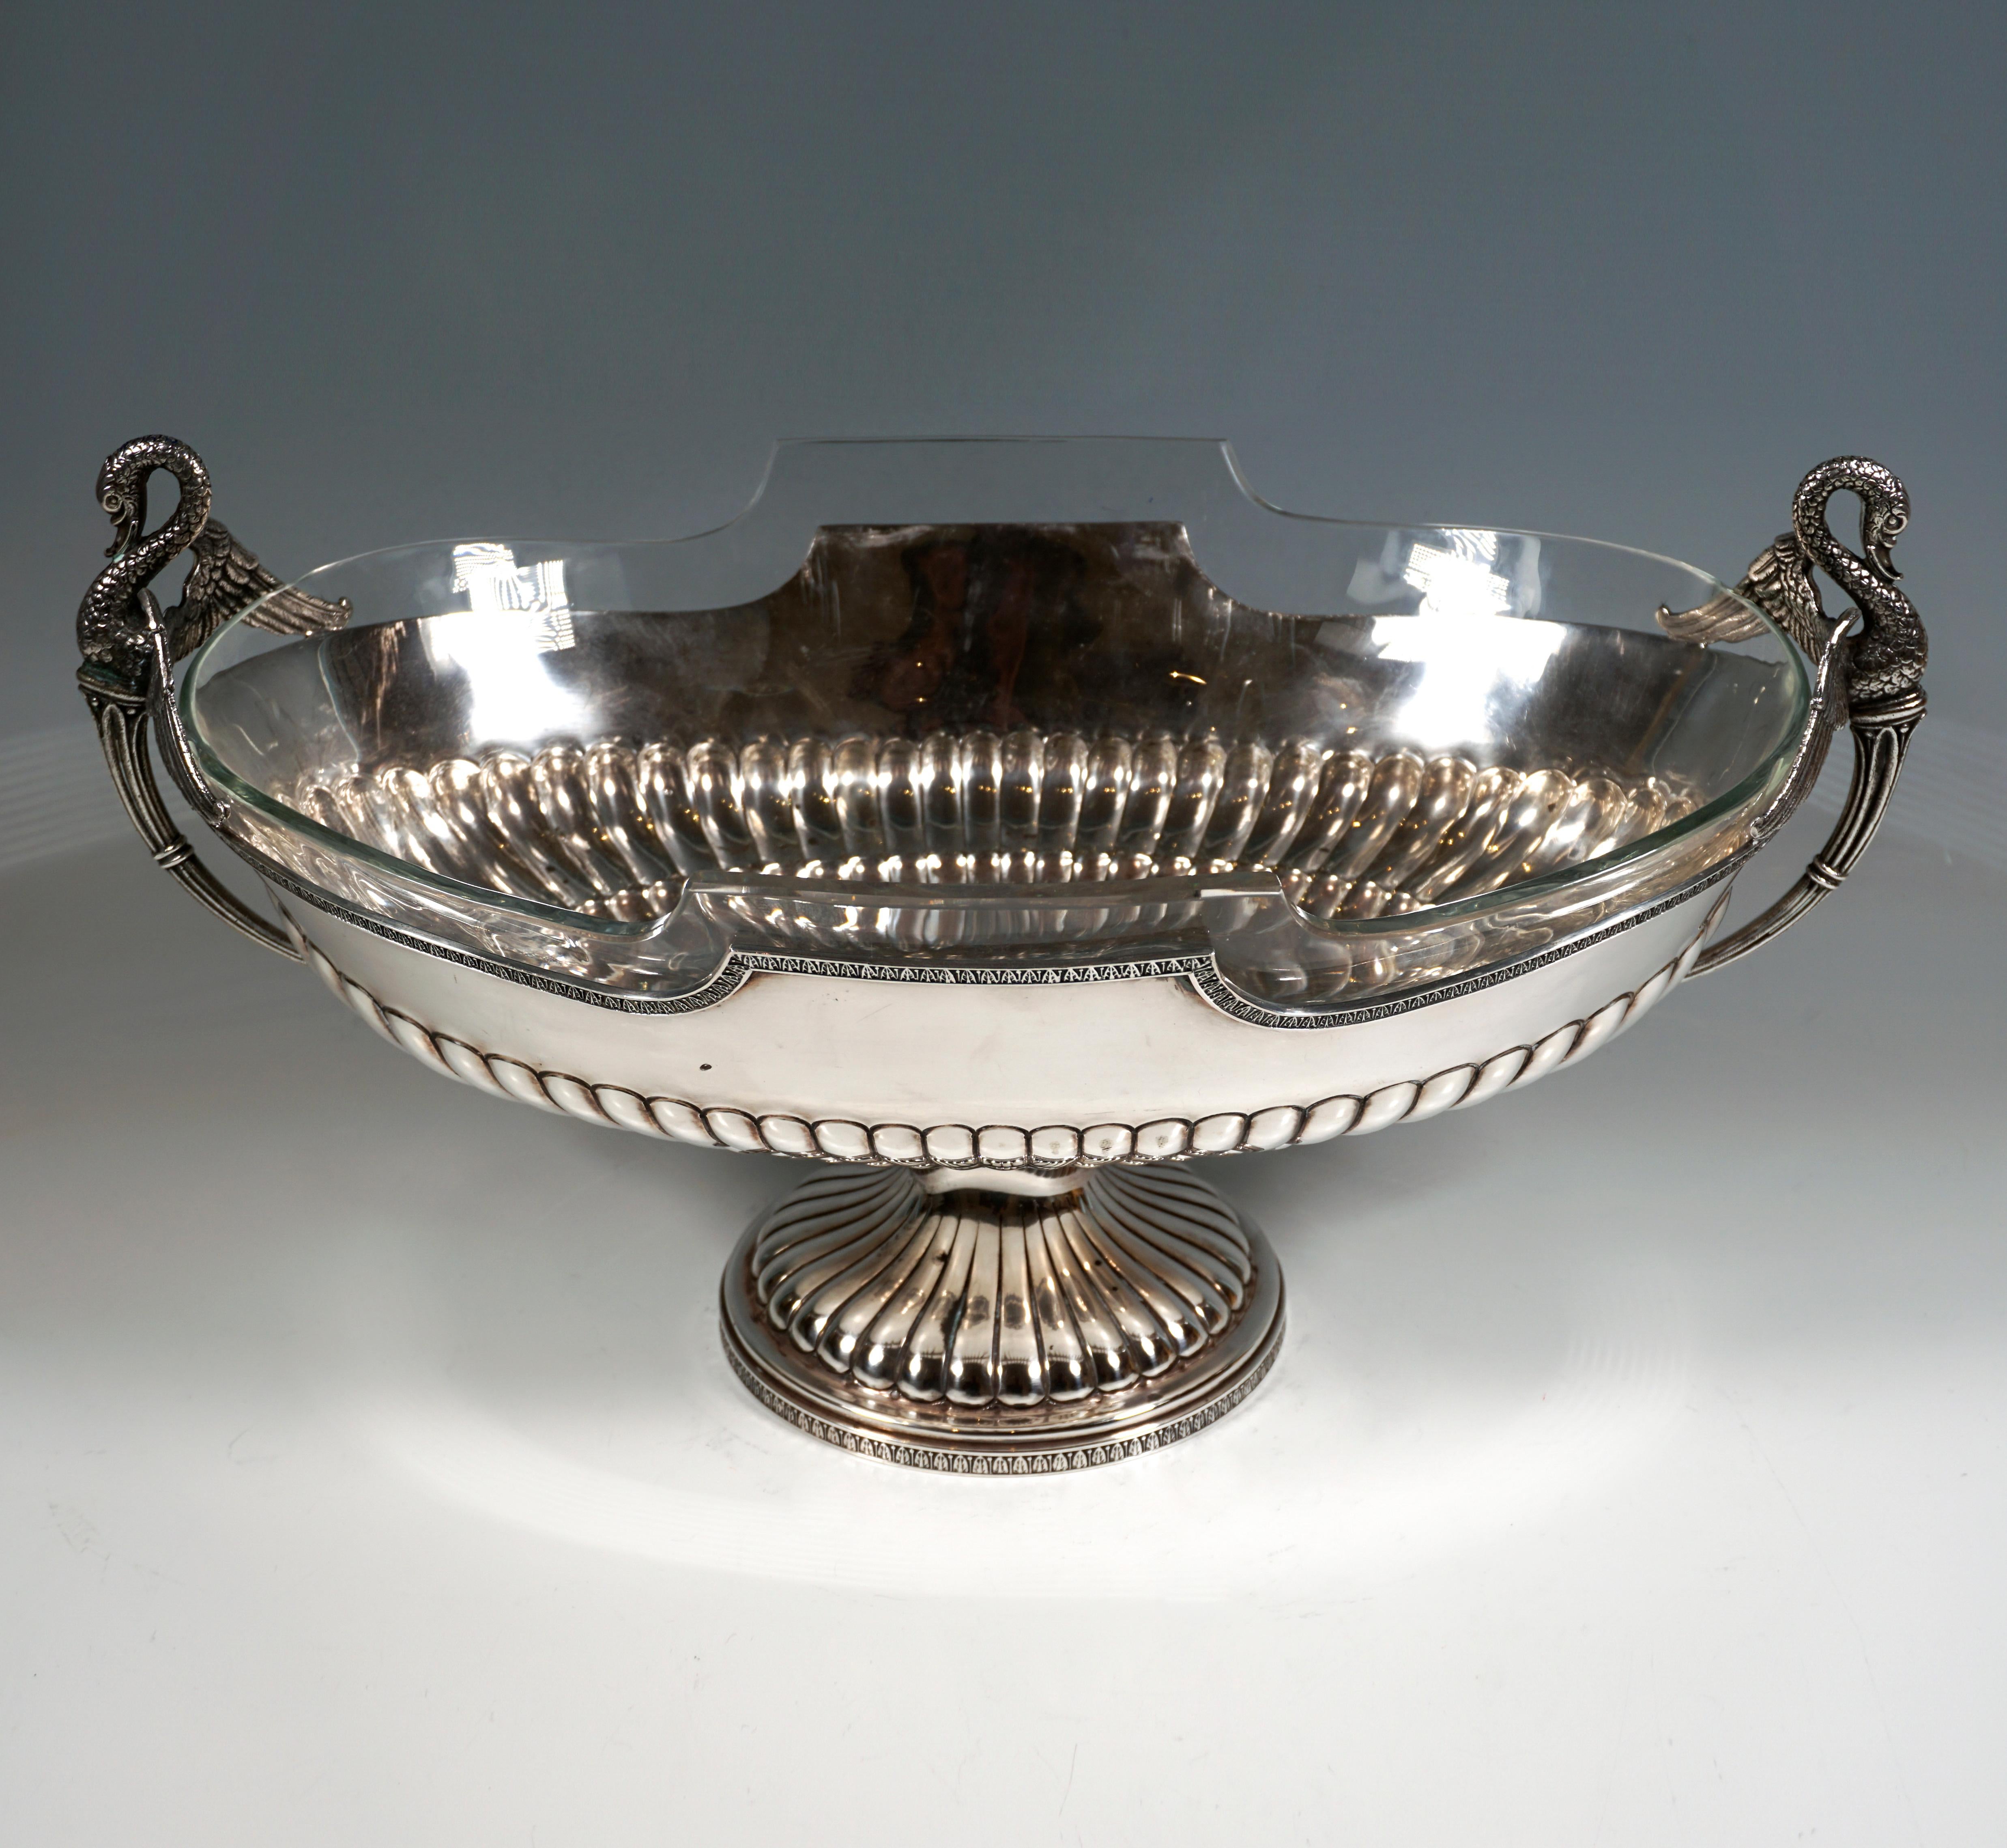 Solid silver vessel in an oval basic form with a wide, bulbous body, offset, domed, round base with hump decoration and palmette decorative strip on the outside of the base ring, hump decoration in the lower half of the vessel body in one step,